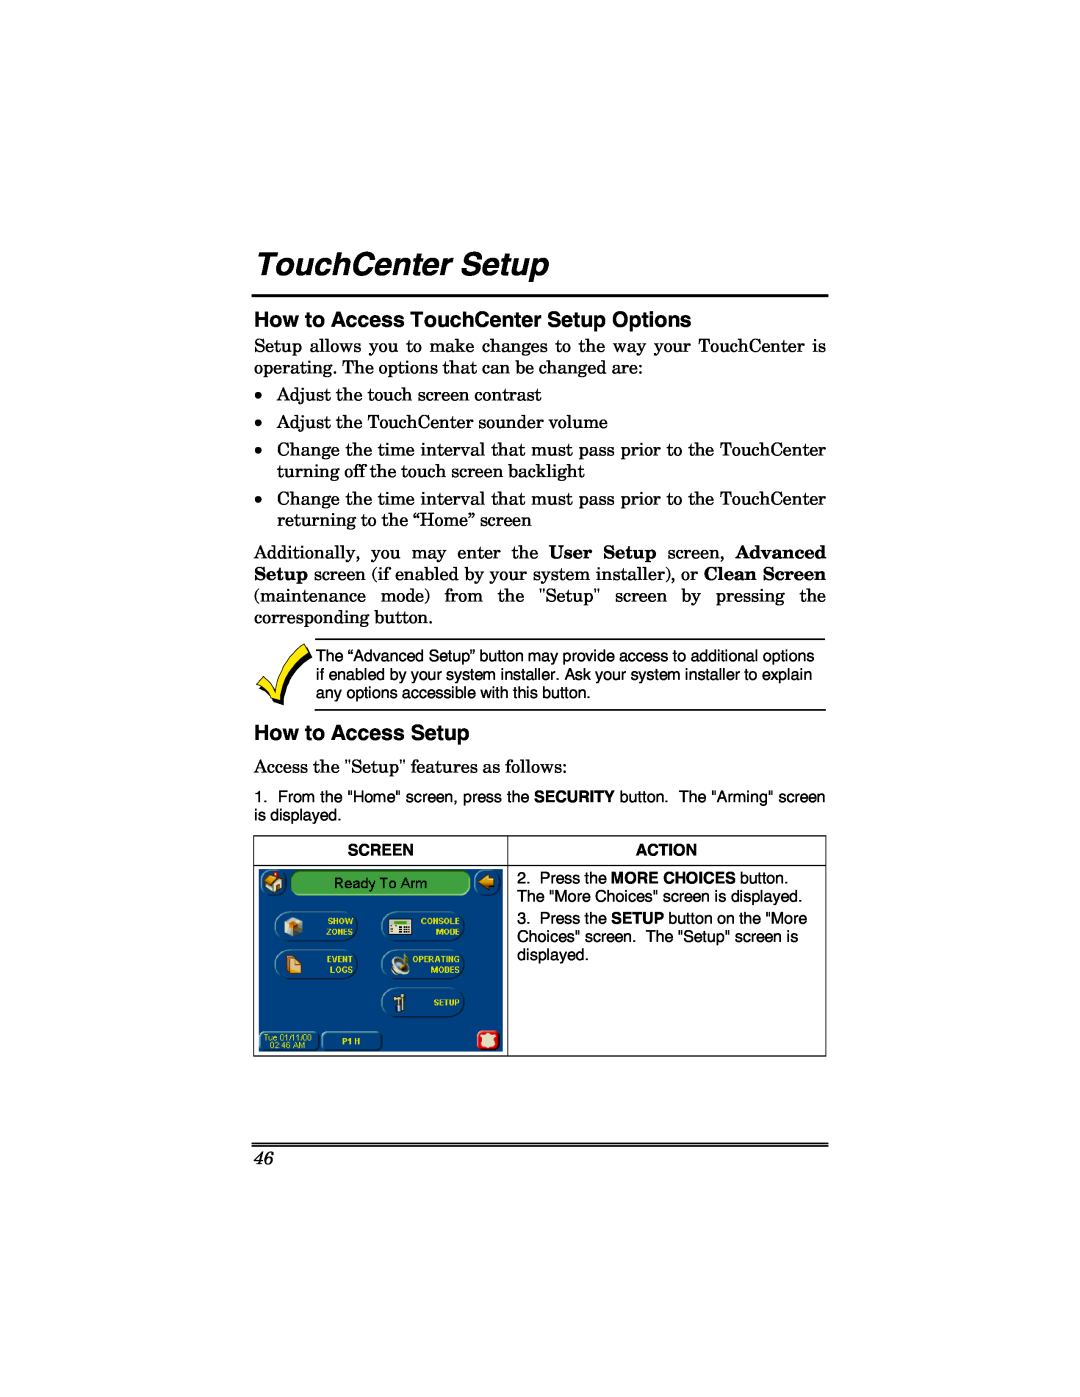 Honeywell 6271 manual How to Access TouchCenter Setup Options, How to Access Setup 